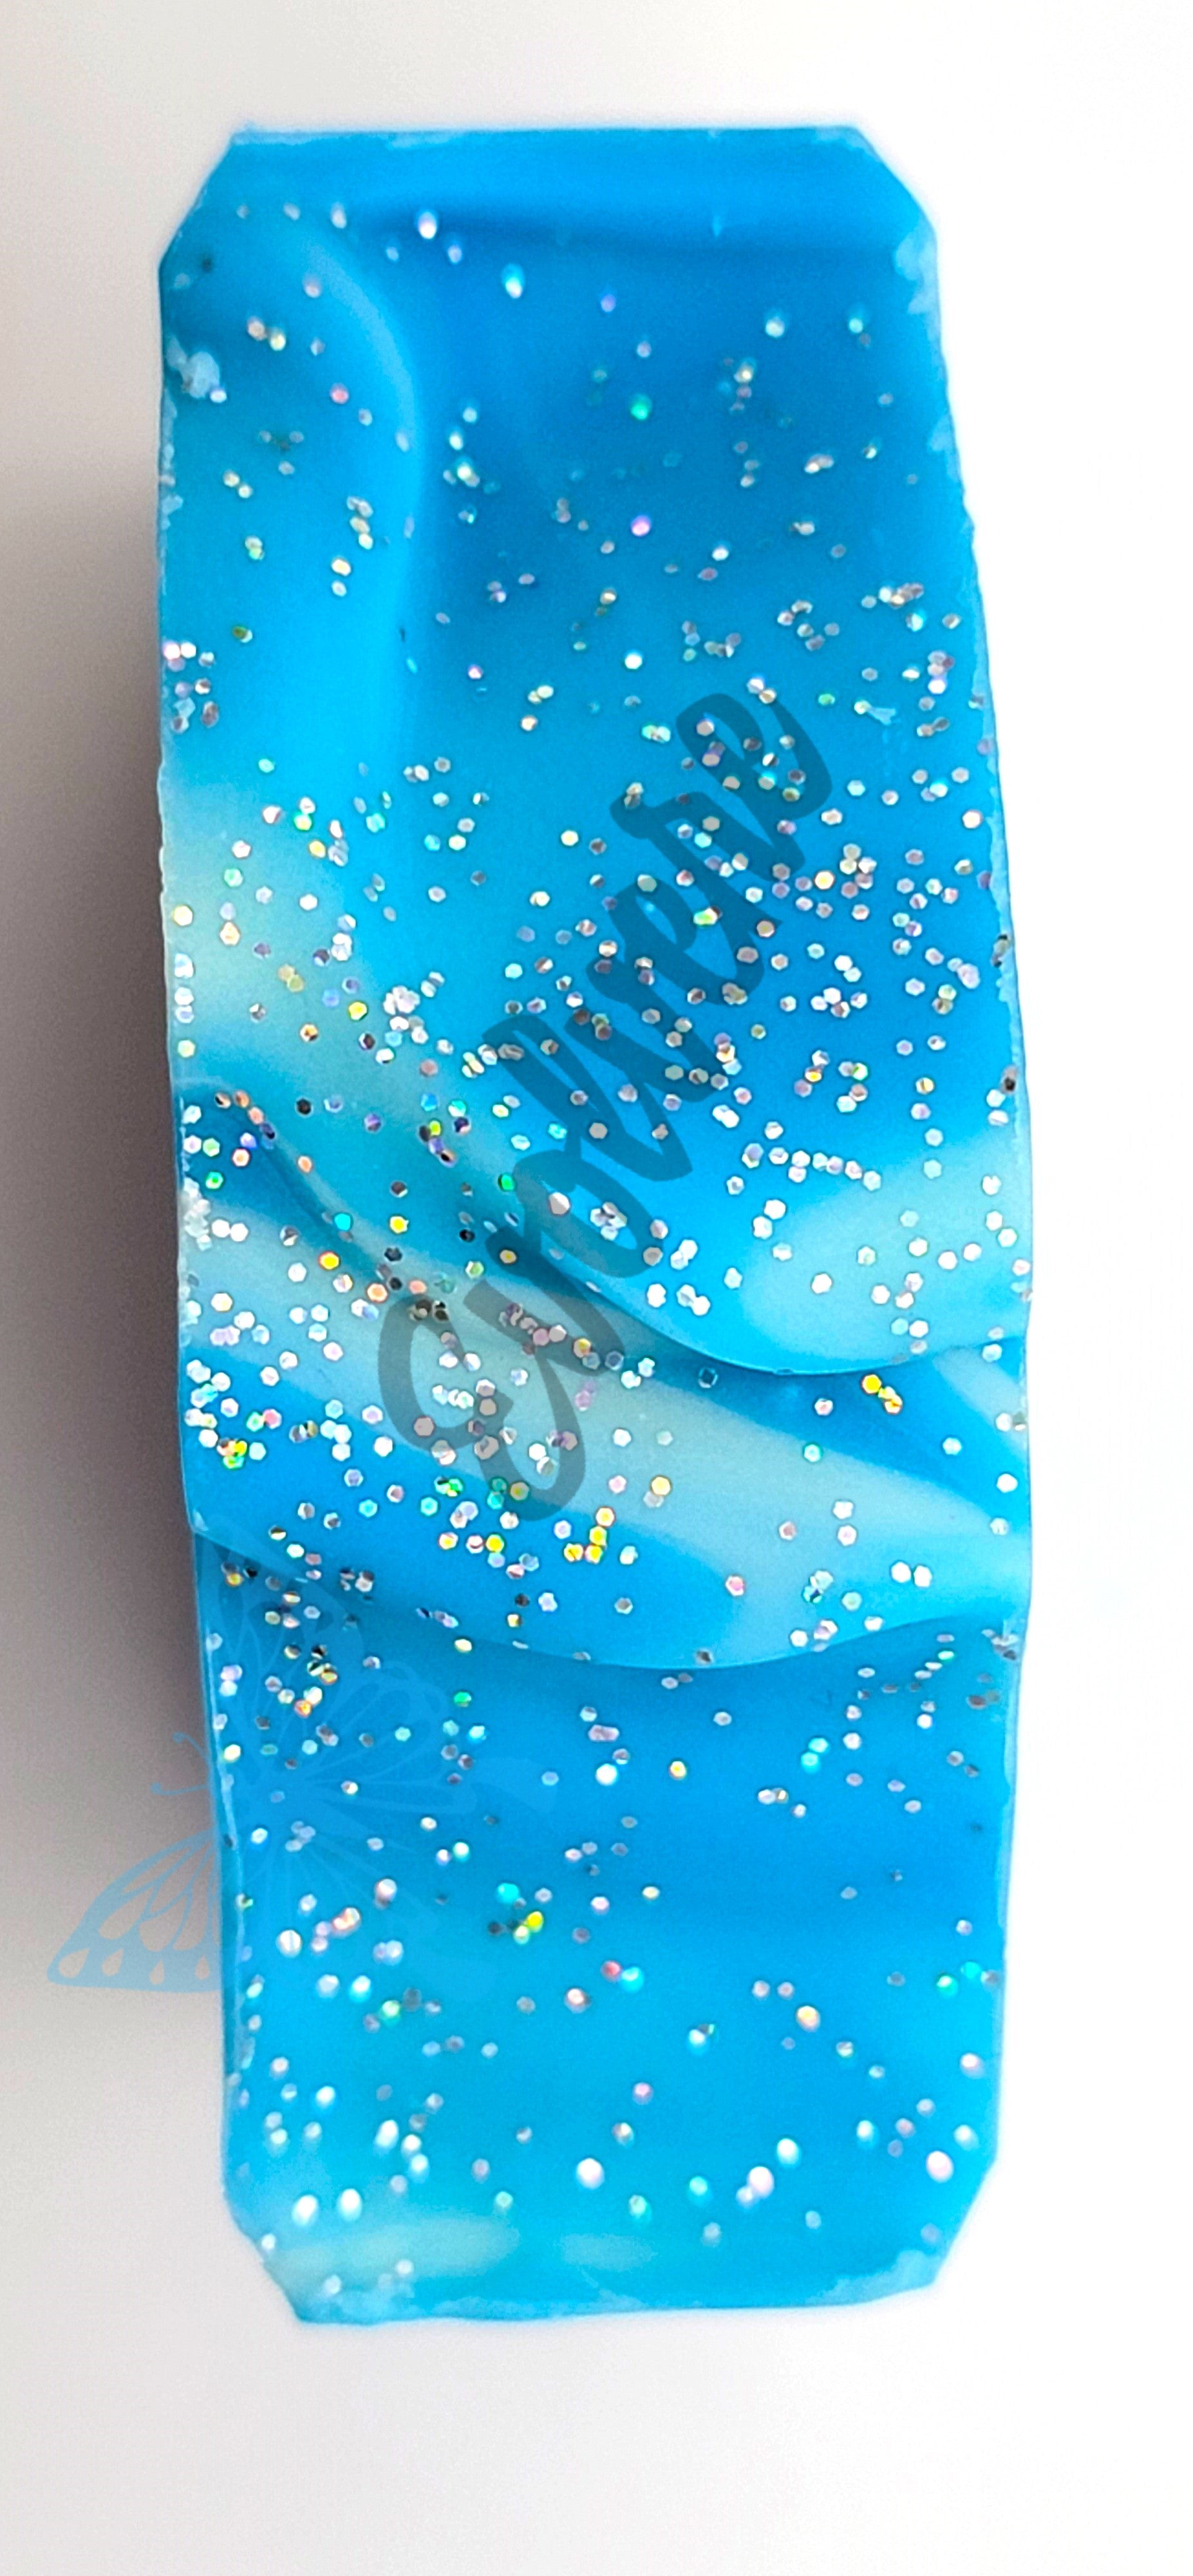 Textured blue and white top with silver biodegradable glitter